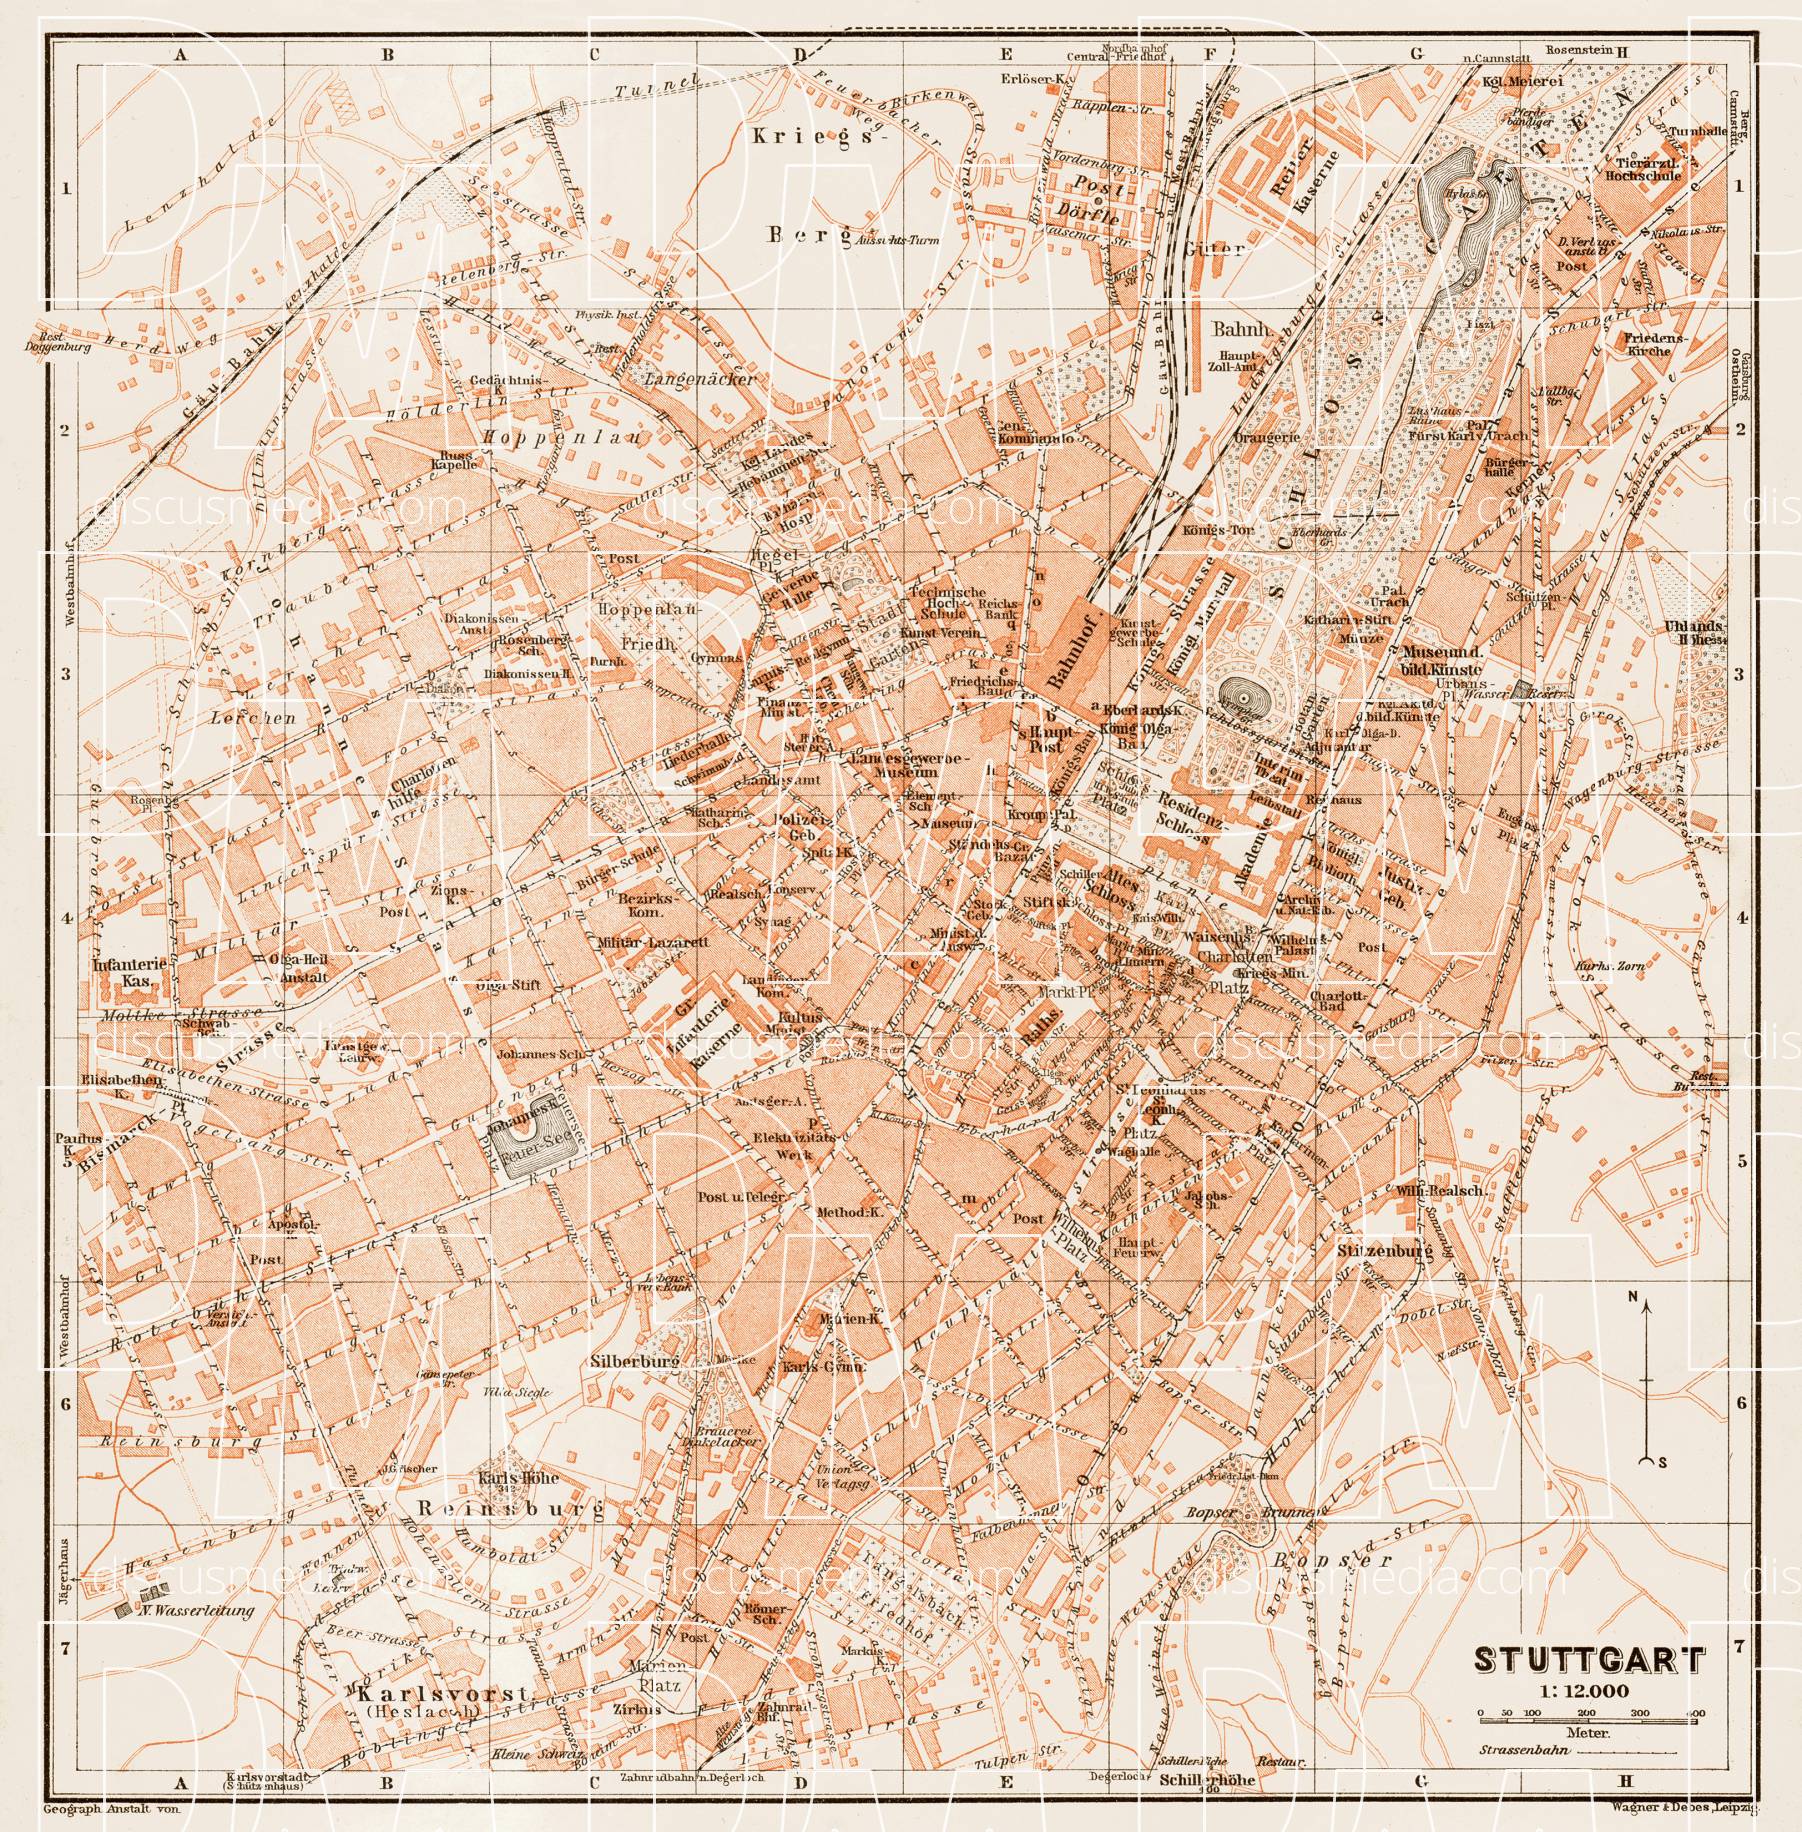 Old map of Stuttgart in 1909. Buy vintage map replica poster print or